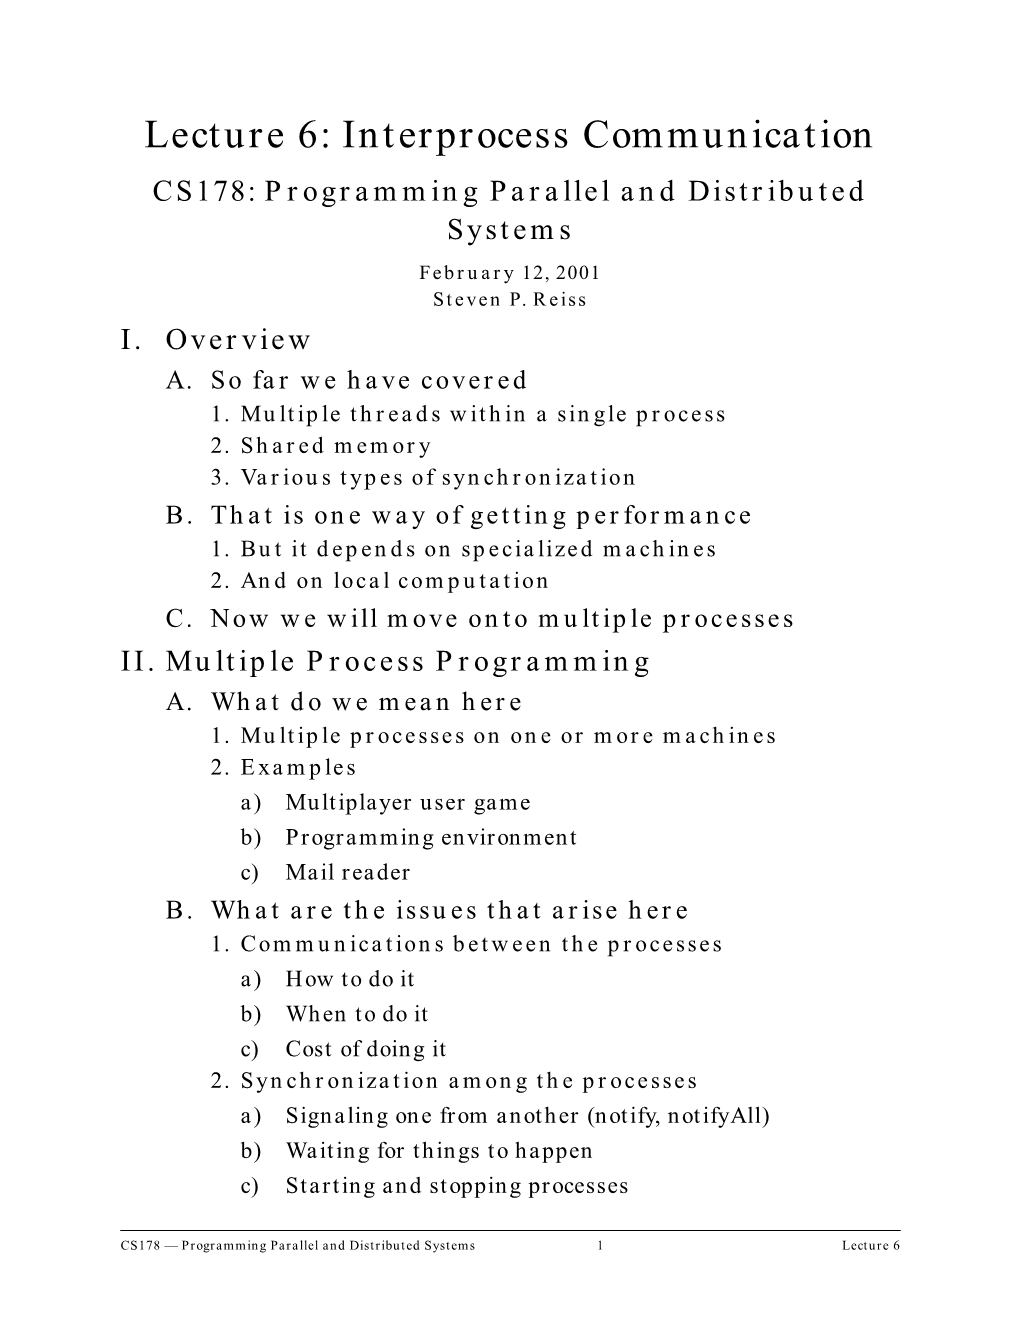 Lecture 6: Interprocess Communication CS178: Programming Parallel and Distributed Systems February 12, 2001 Steven P